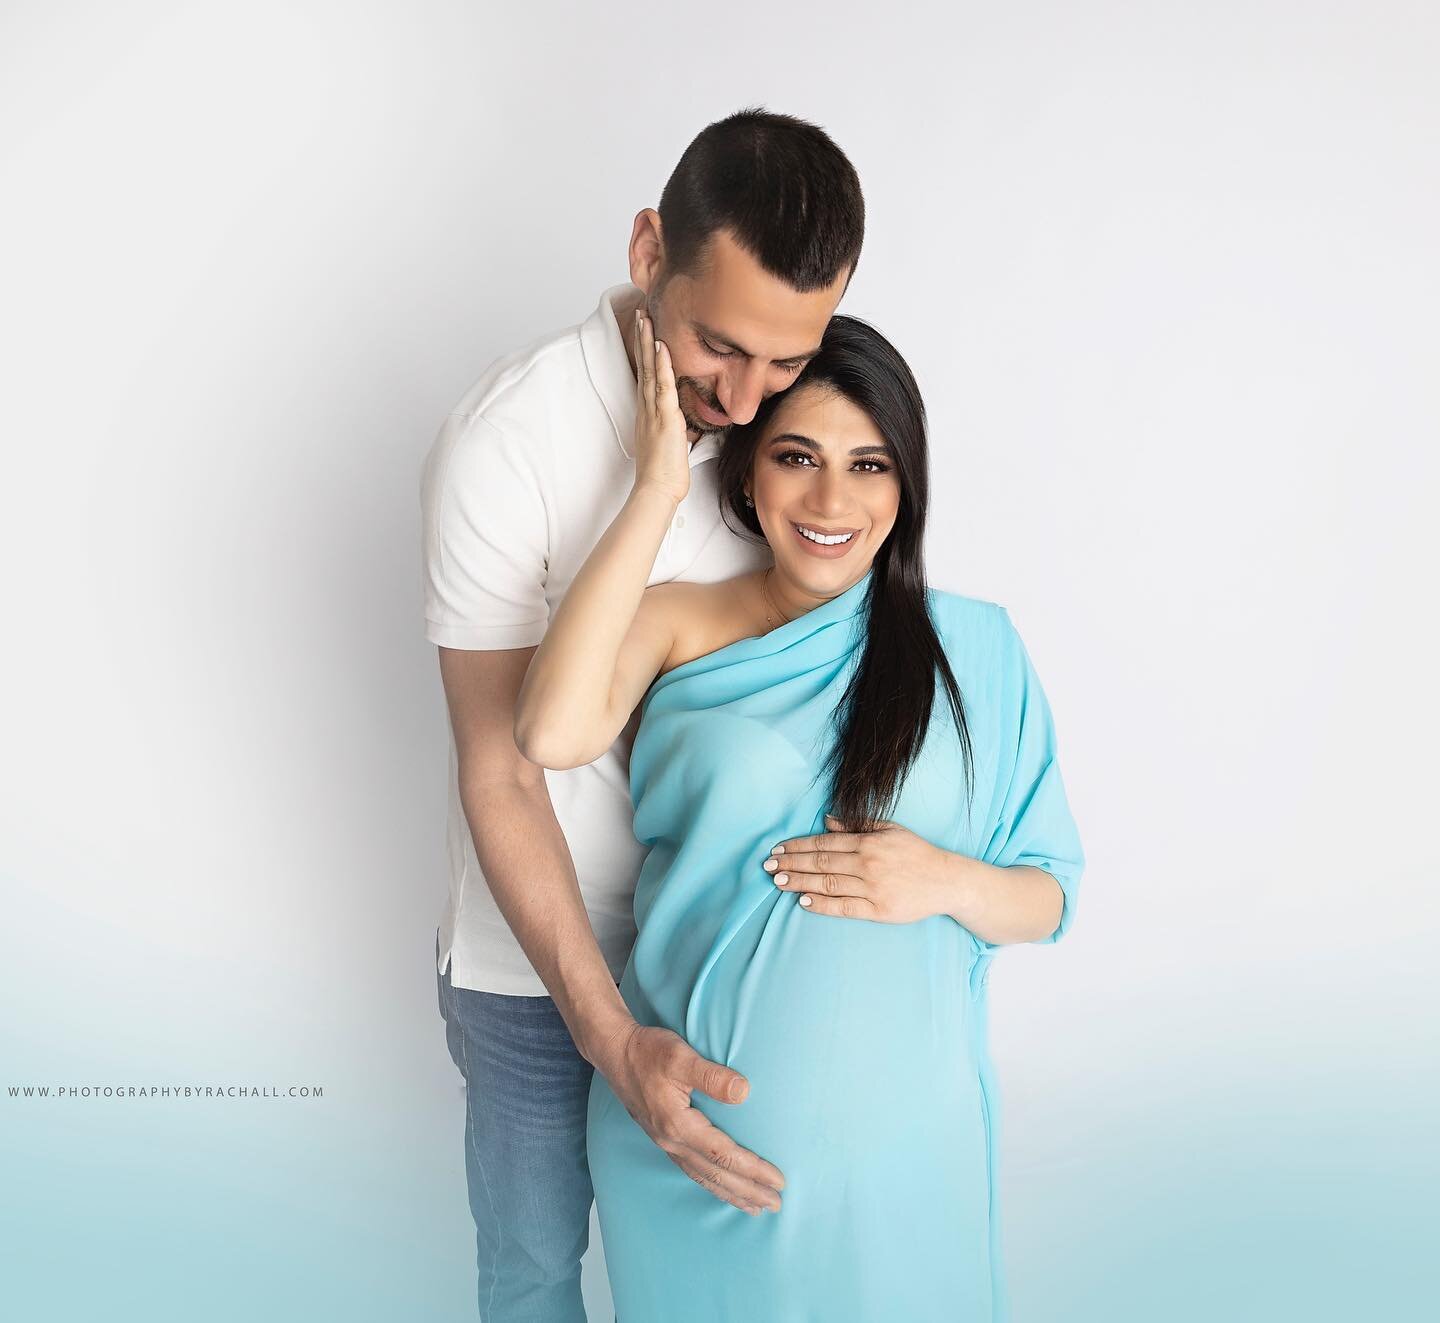 Maternity sessions a chance to capture a couples journey during this time

Bookings: +96170415050 or click the CONTACT BUTTON 

#newborns#newbornphotography #newbornworkshop #newbornphotographer #pregnancyphotoshoot #pregnancyphotography #maternityph